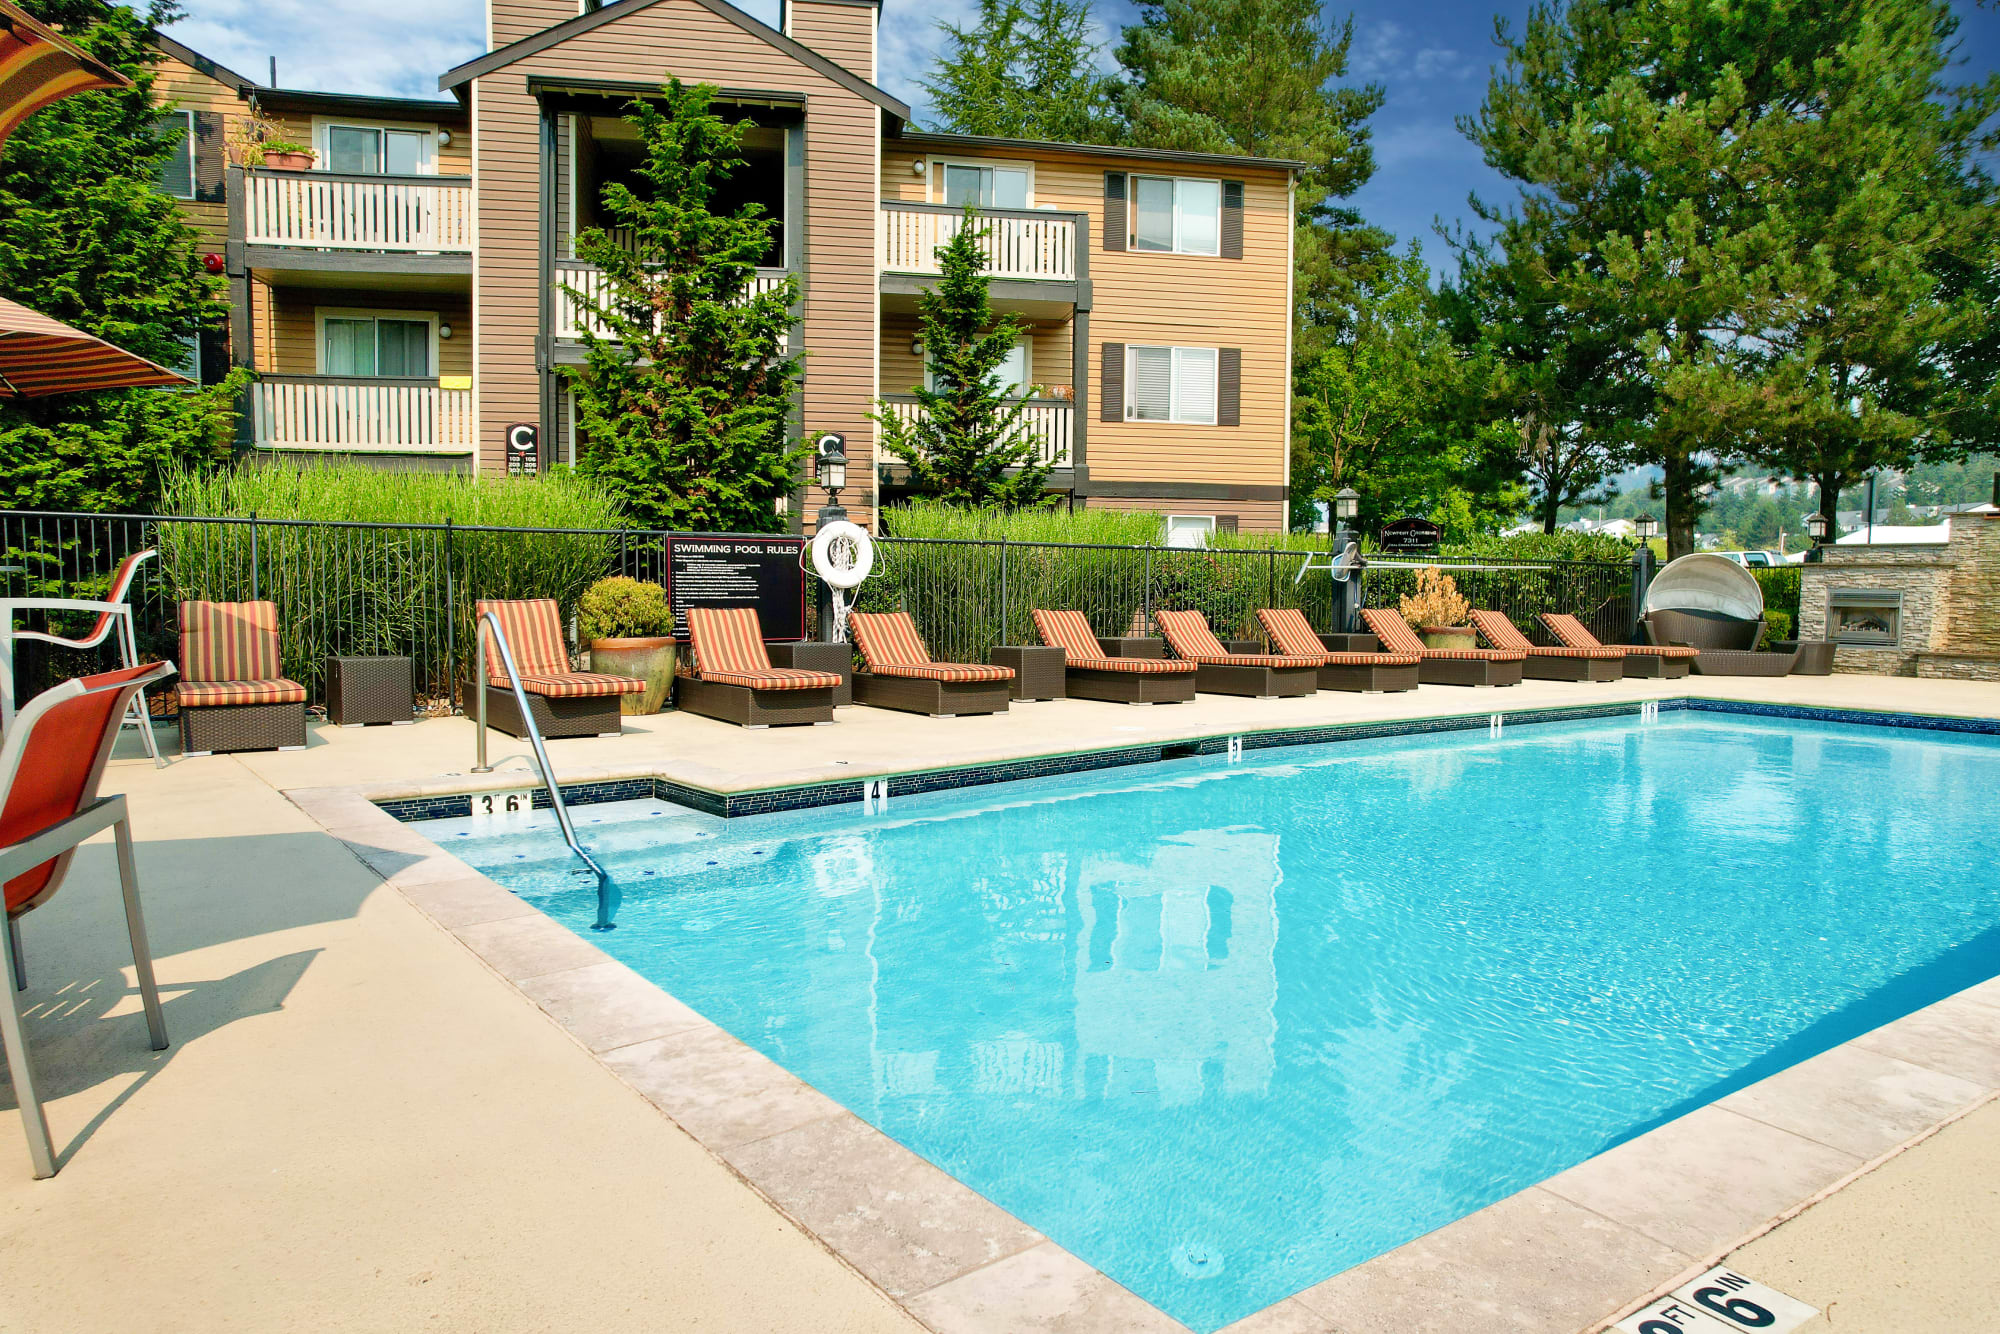 Sparking pool view with lounge chairs, tables and umbrellas at Newport Crossing Apartments in Newcastle, Washington